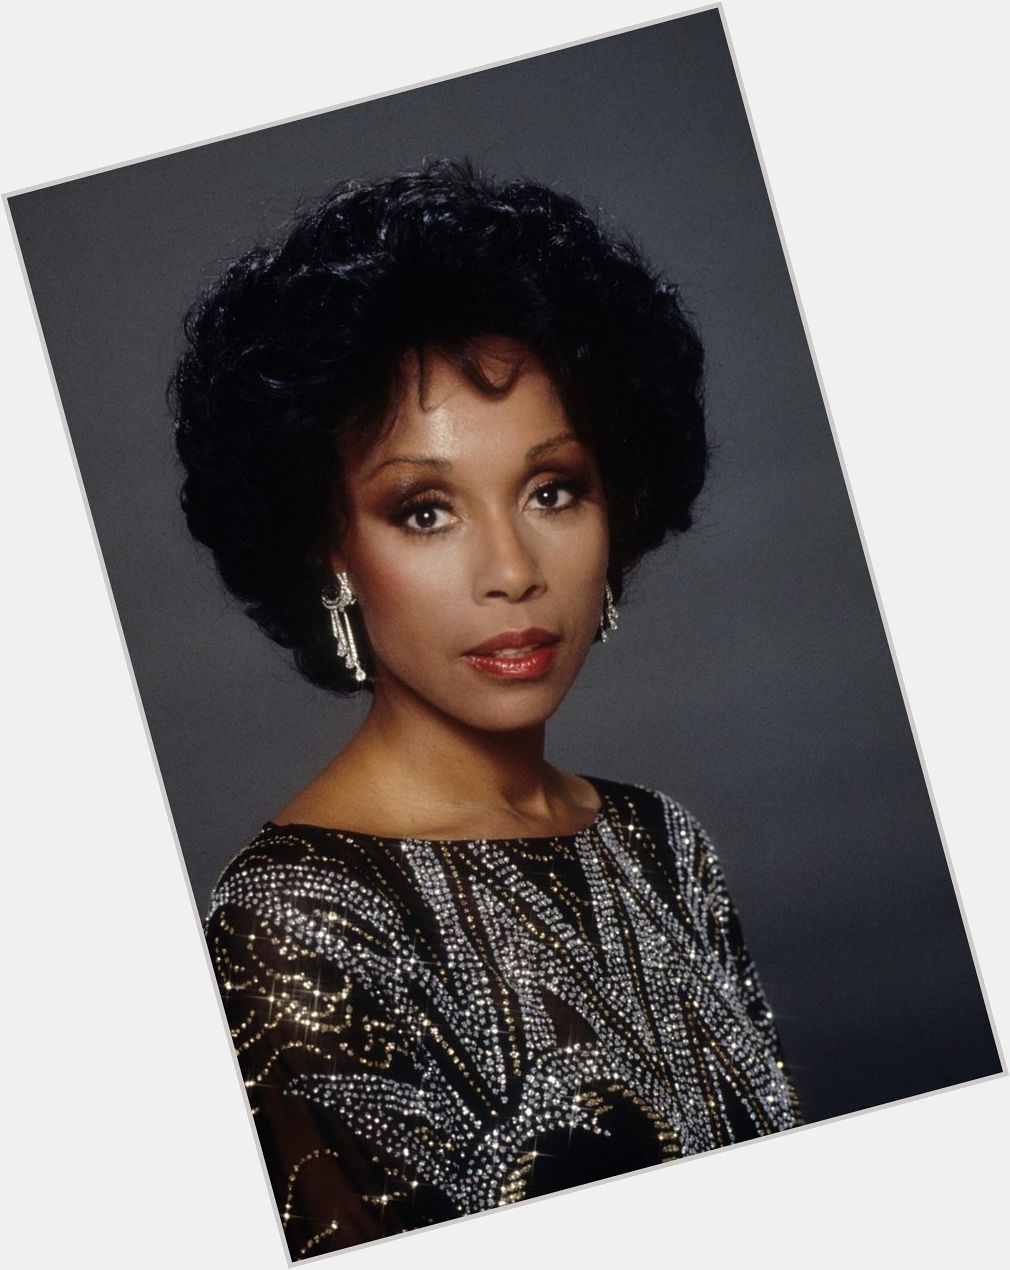  Happy Birthday Diahann Carroll your so beautiful.  I hope your Birthday is as great as you. 